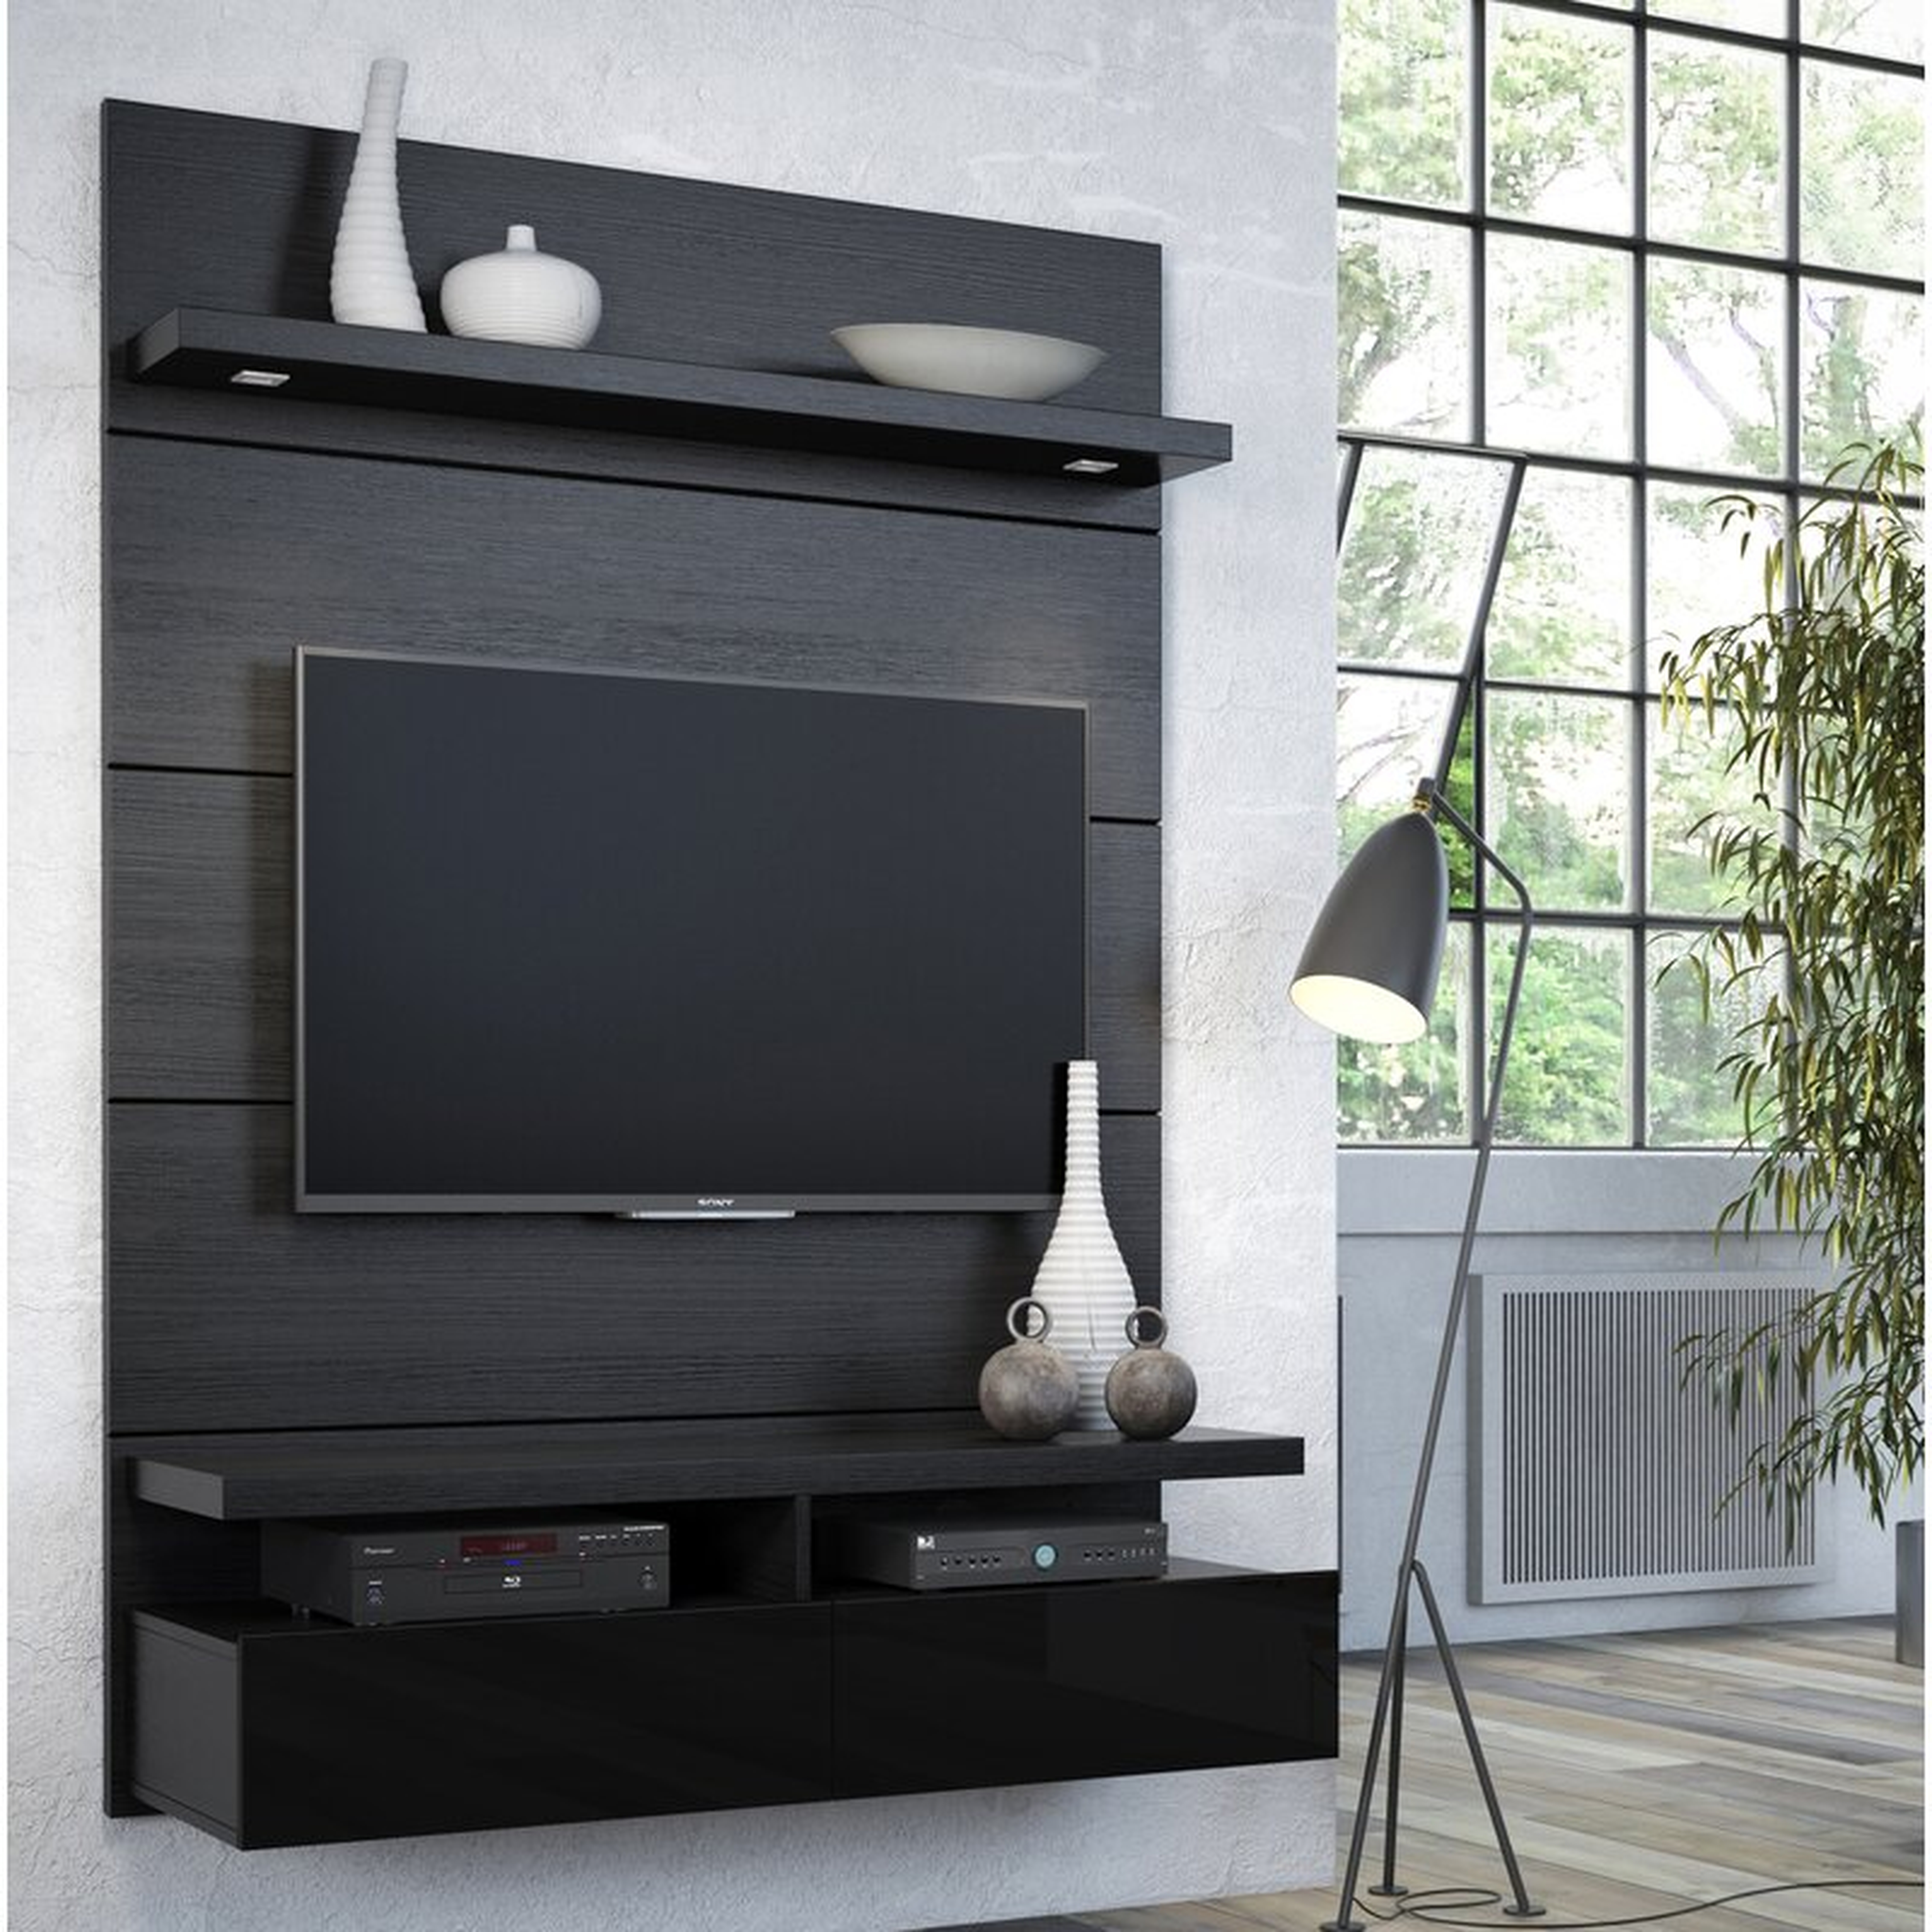 Burrier Floating Entertainment Center for TVs up to 42 inches - AllModern